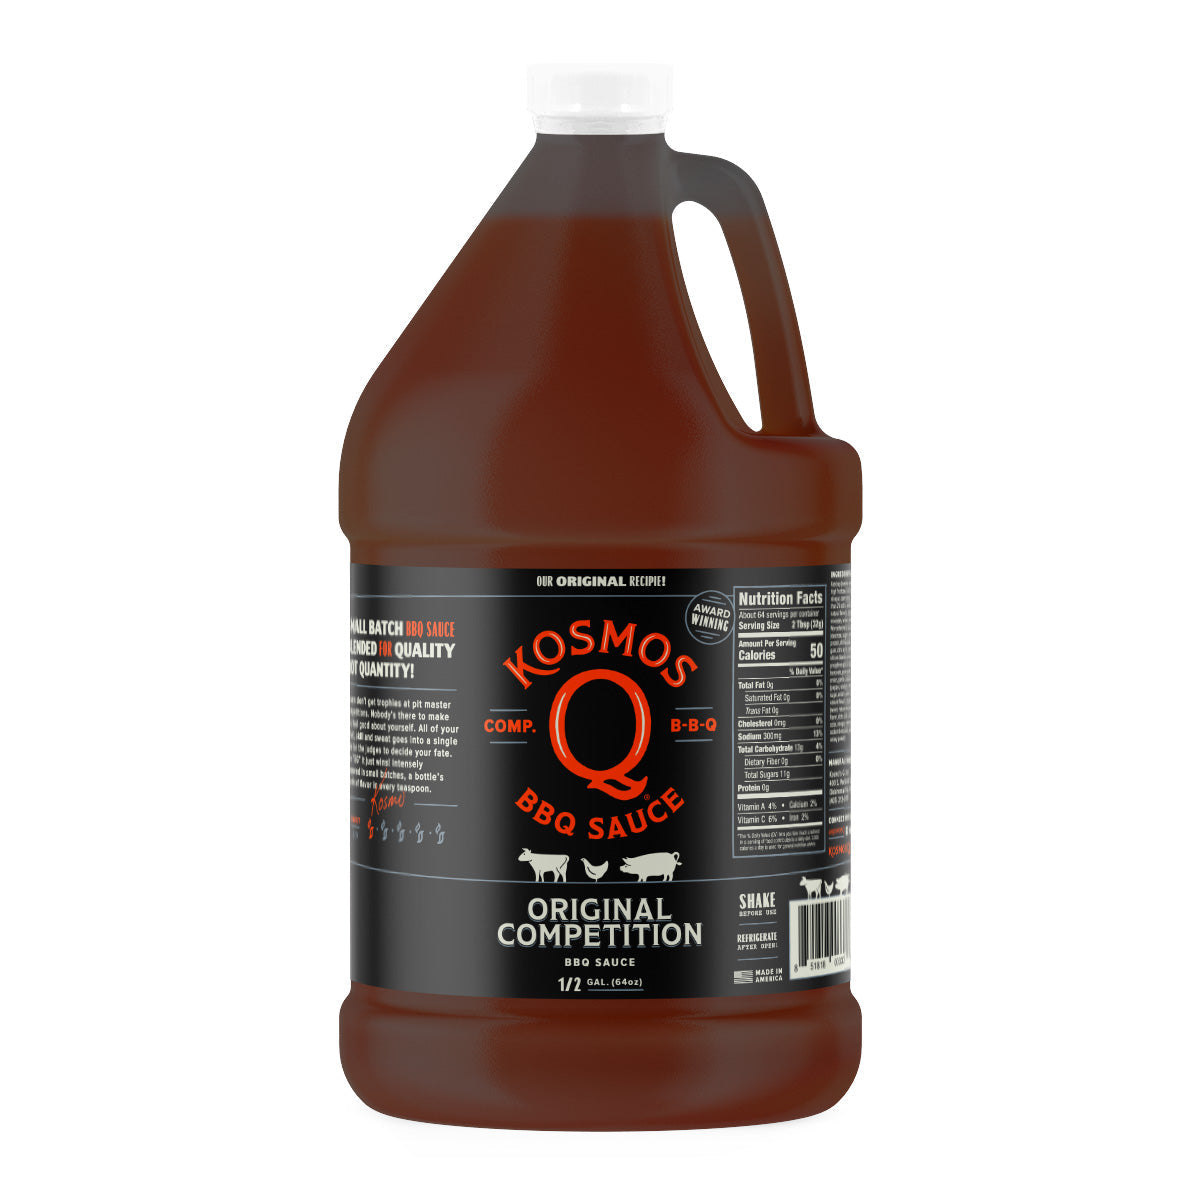 Finally got my hands on some Kosmo's Q Competition BBQ Products